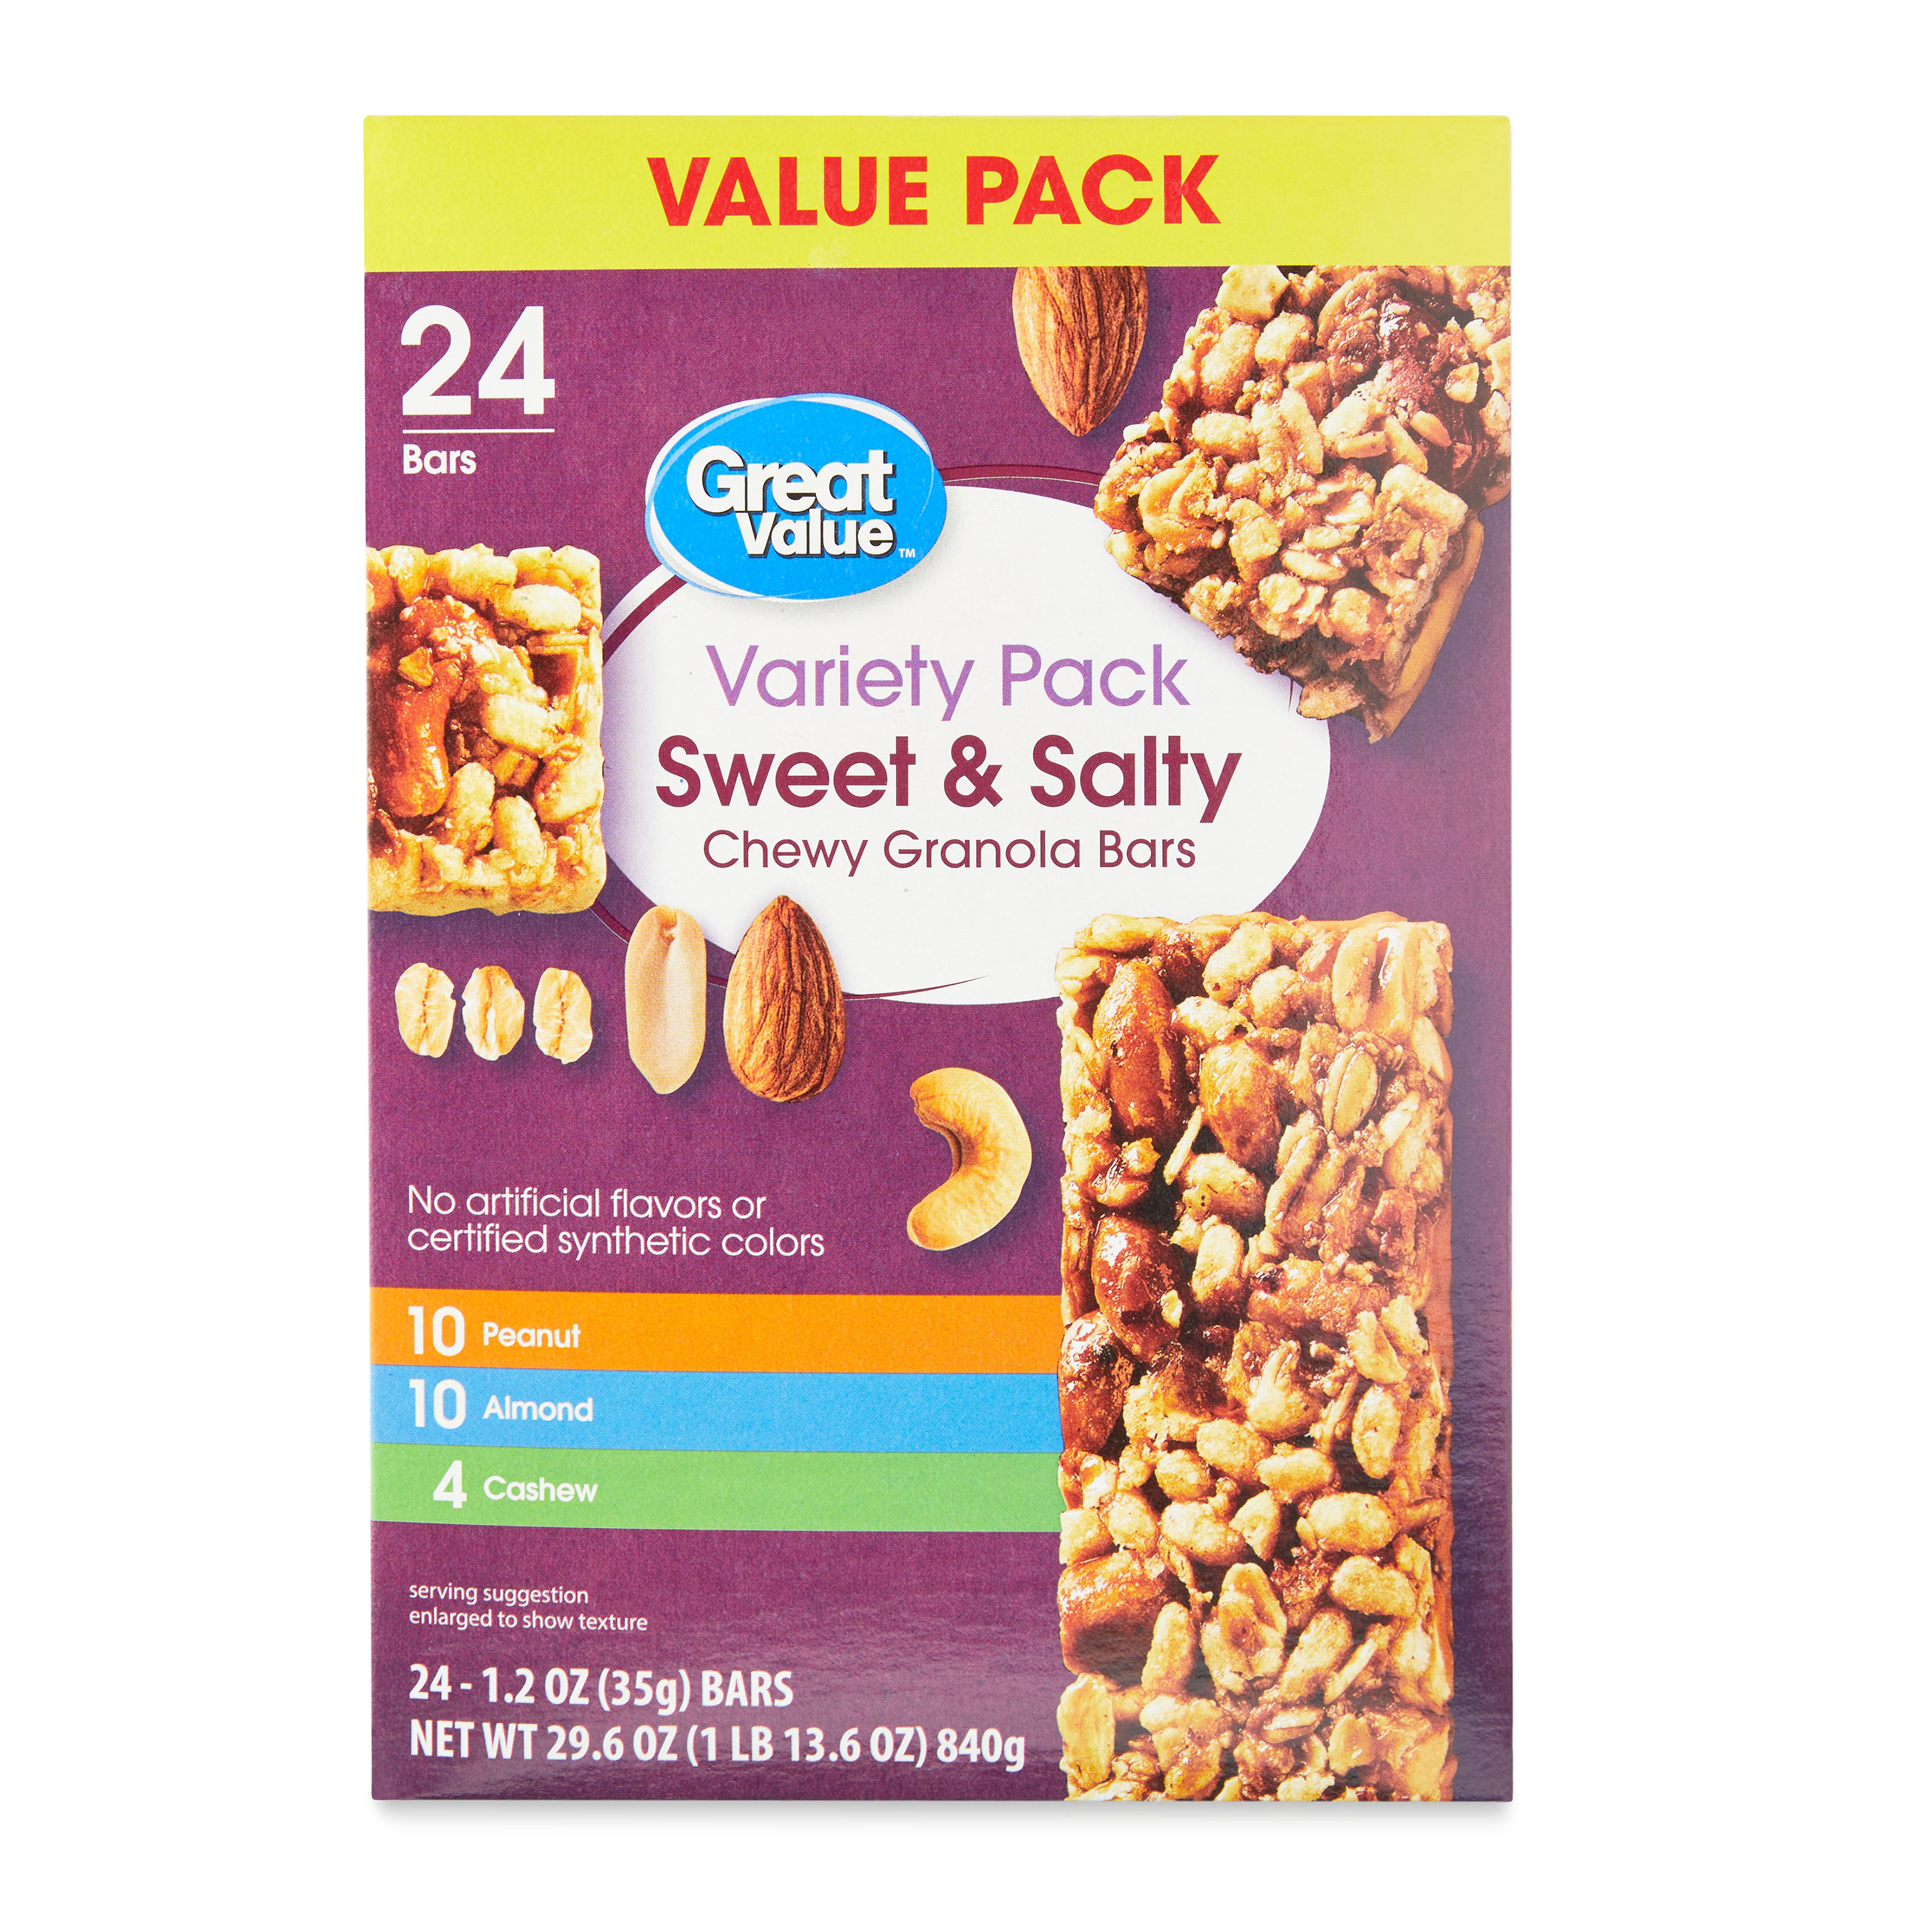 Great Value Variety Pack Sweet & Salty Chewy Granola Bars, 1.2 oz, 24 Count - image 1 of 7